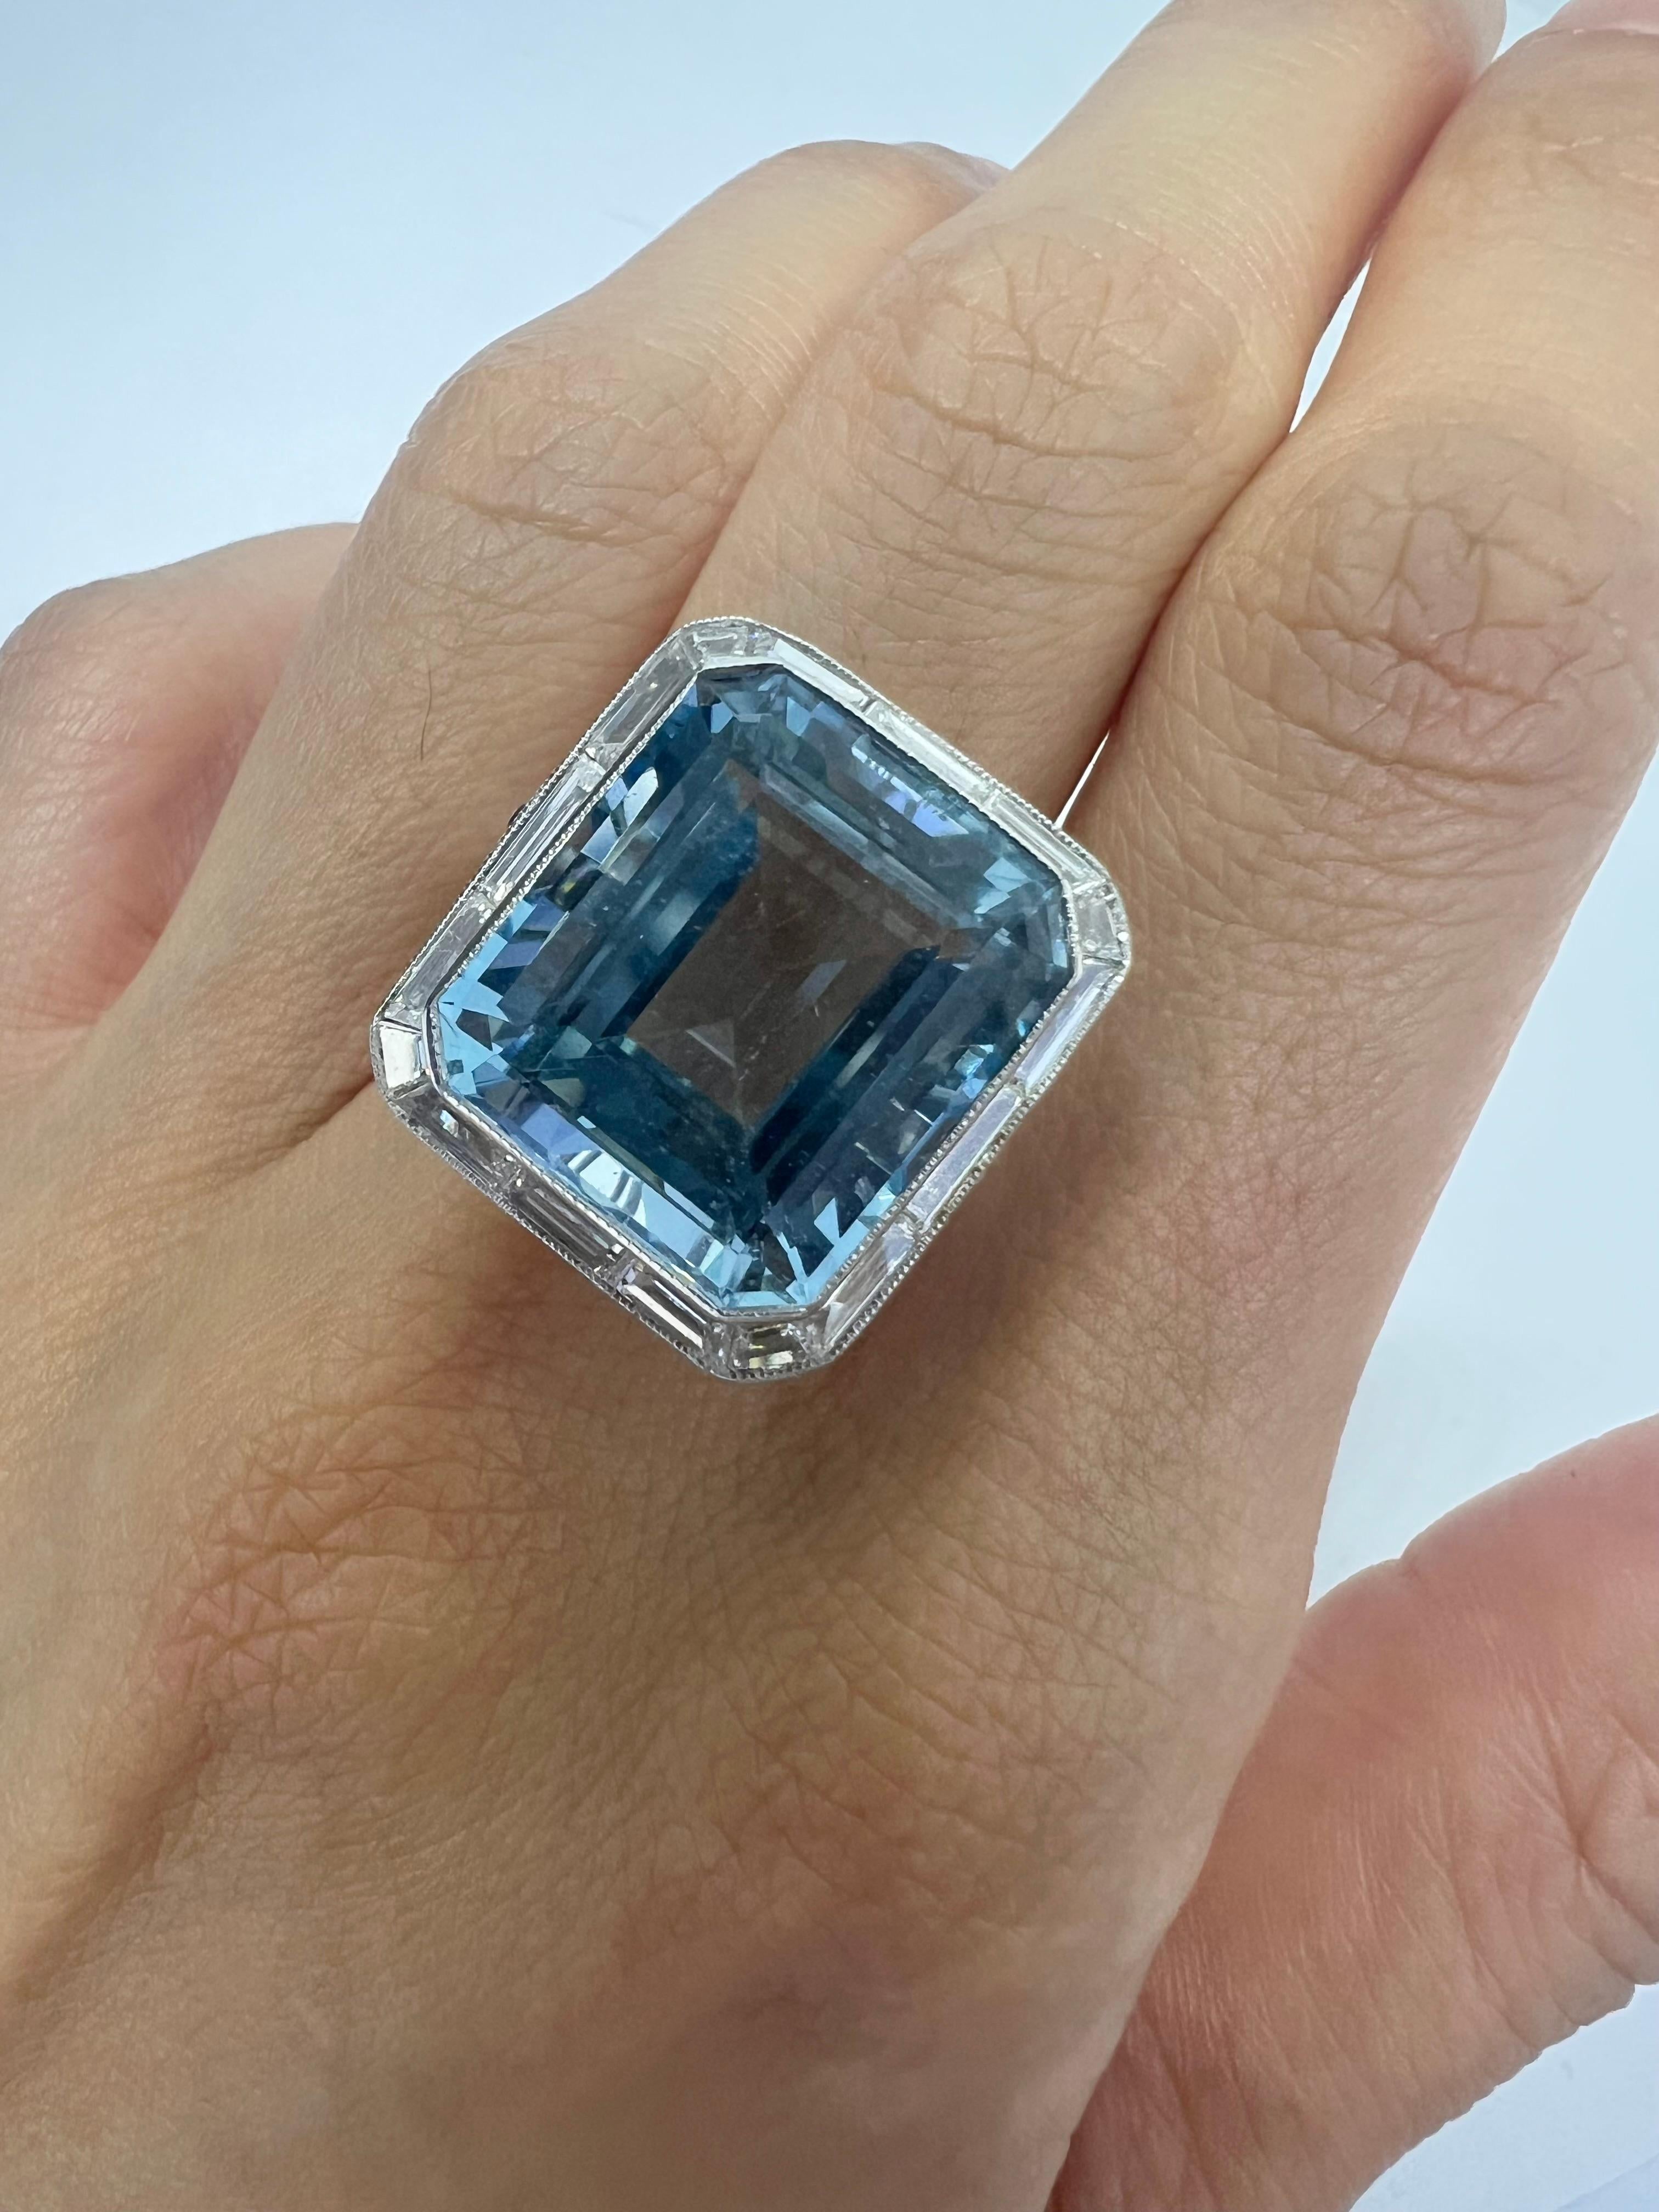 Platinum ring with 16.25 carat aquamarine and 1.26 carat diamond.

Sophia D by Joseph Dardashti LTD has been known worldwide for 35 years and are inspired by classic Art Deco design that merges with modern manufacturing techniques.